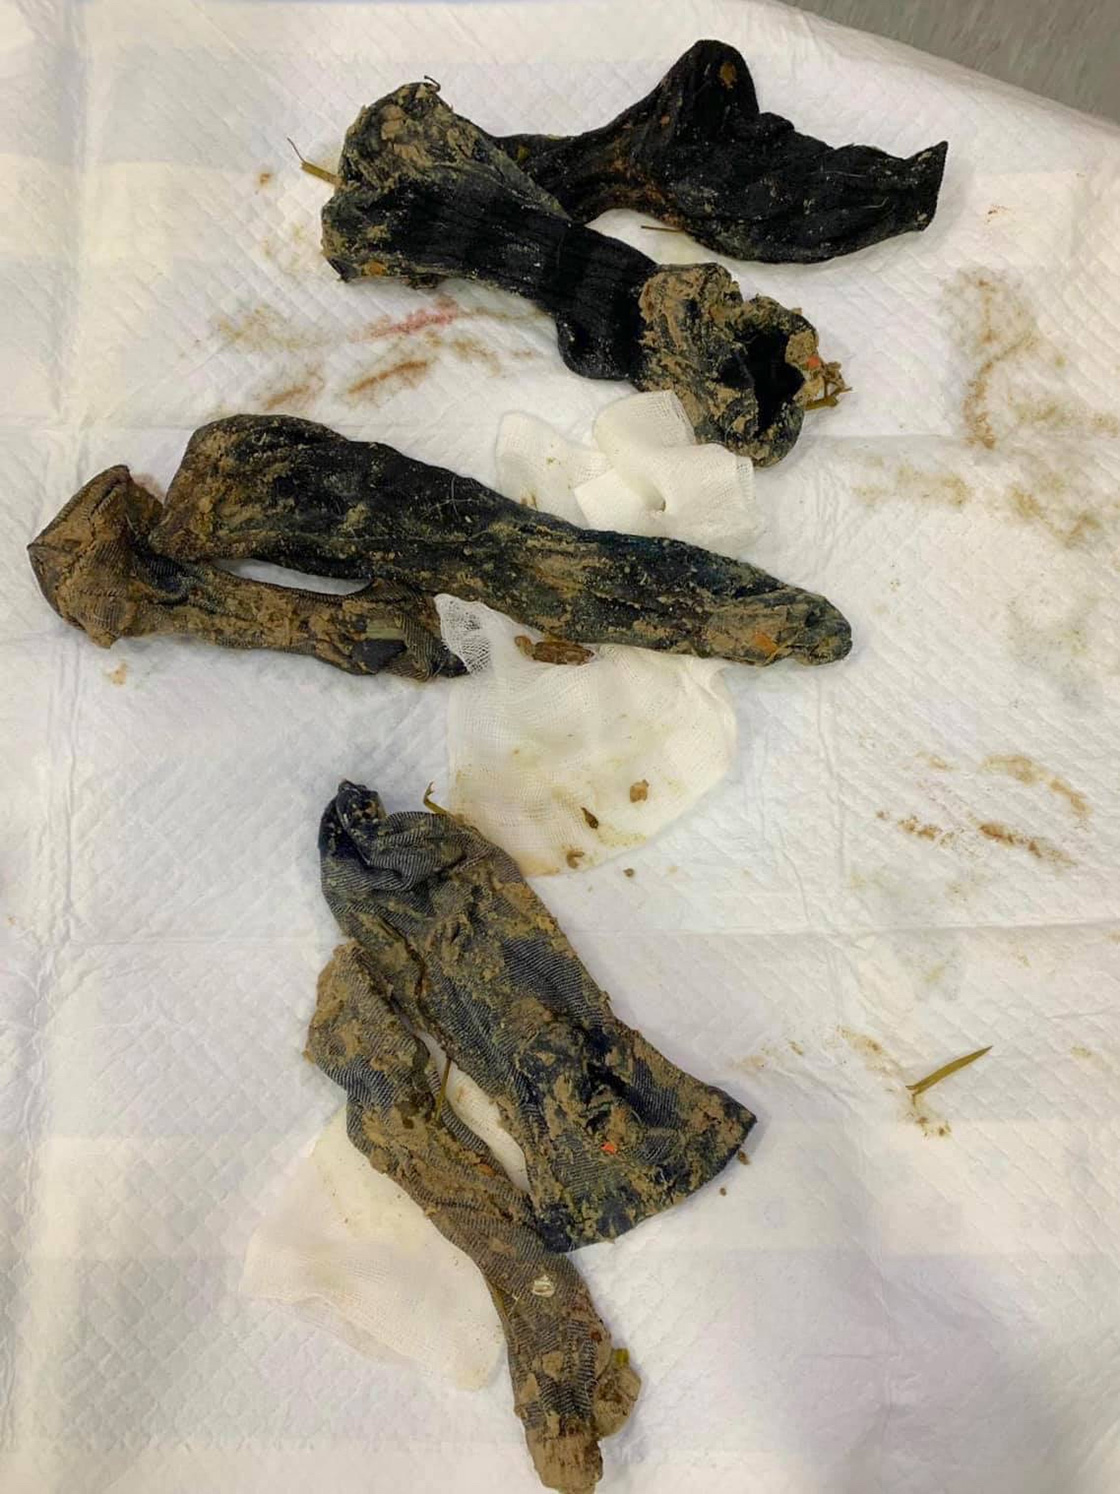 Post-surgical image of extracted foreign material, including fabric and plastic, from a dog's gastrointestinal system.